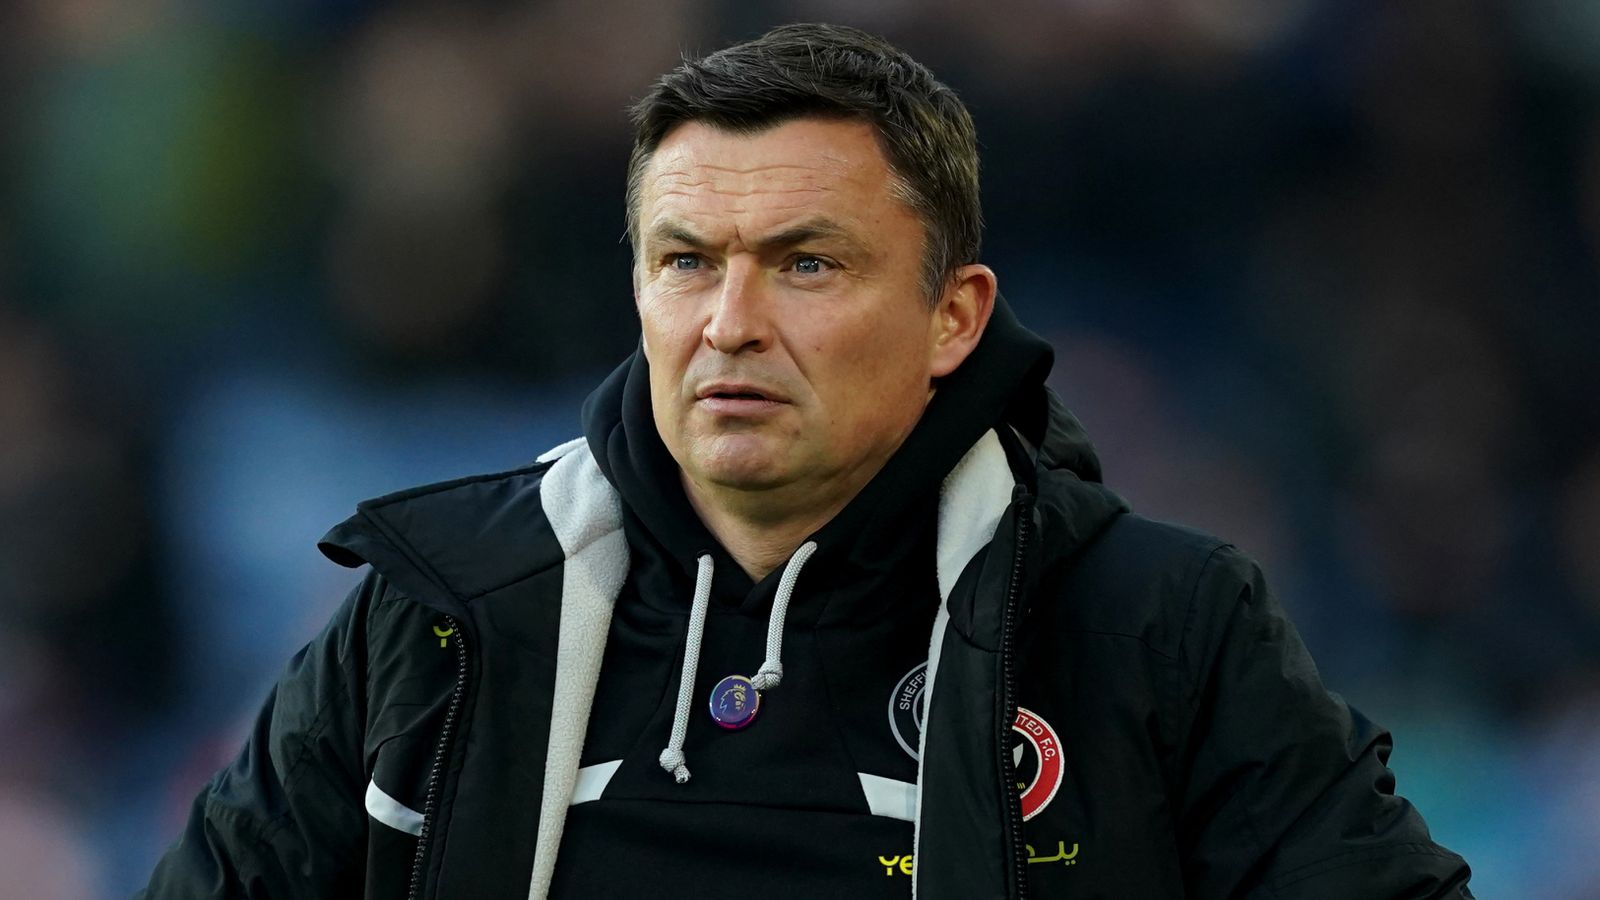 Paul Heckingbottom expected to be sacked by Sheffield United; Chris Wilder in talks | Football News